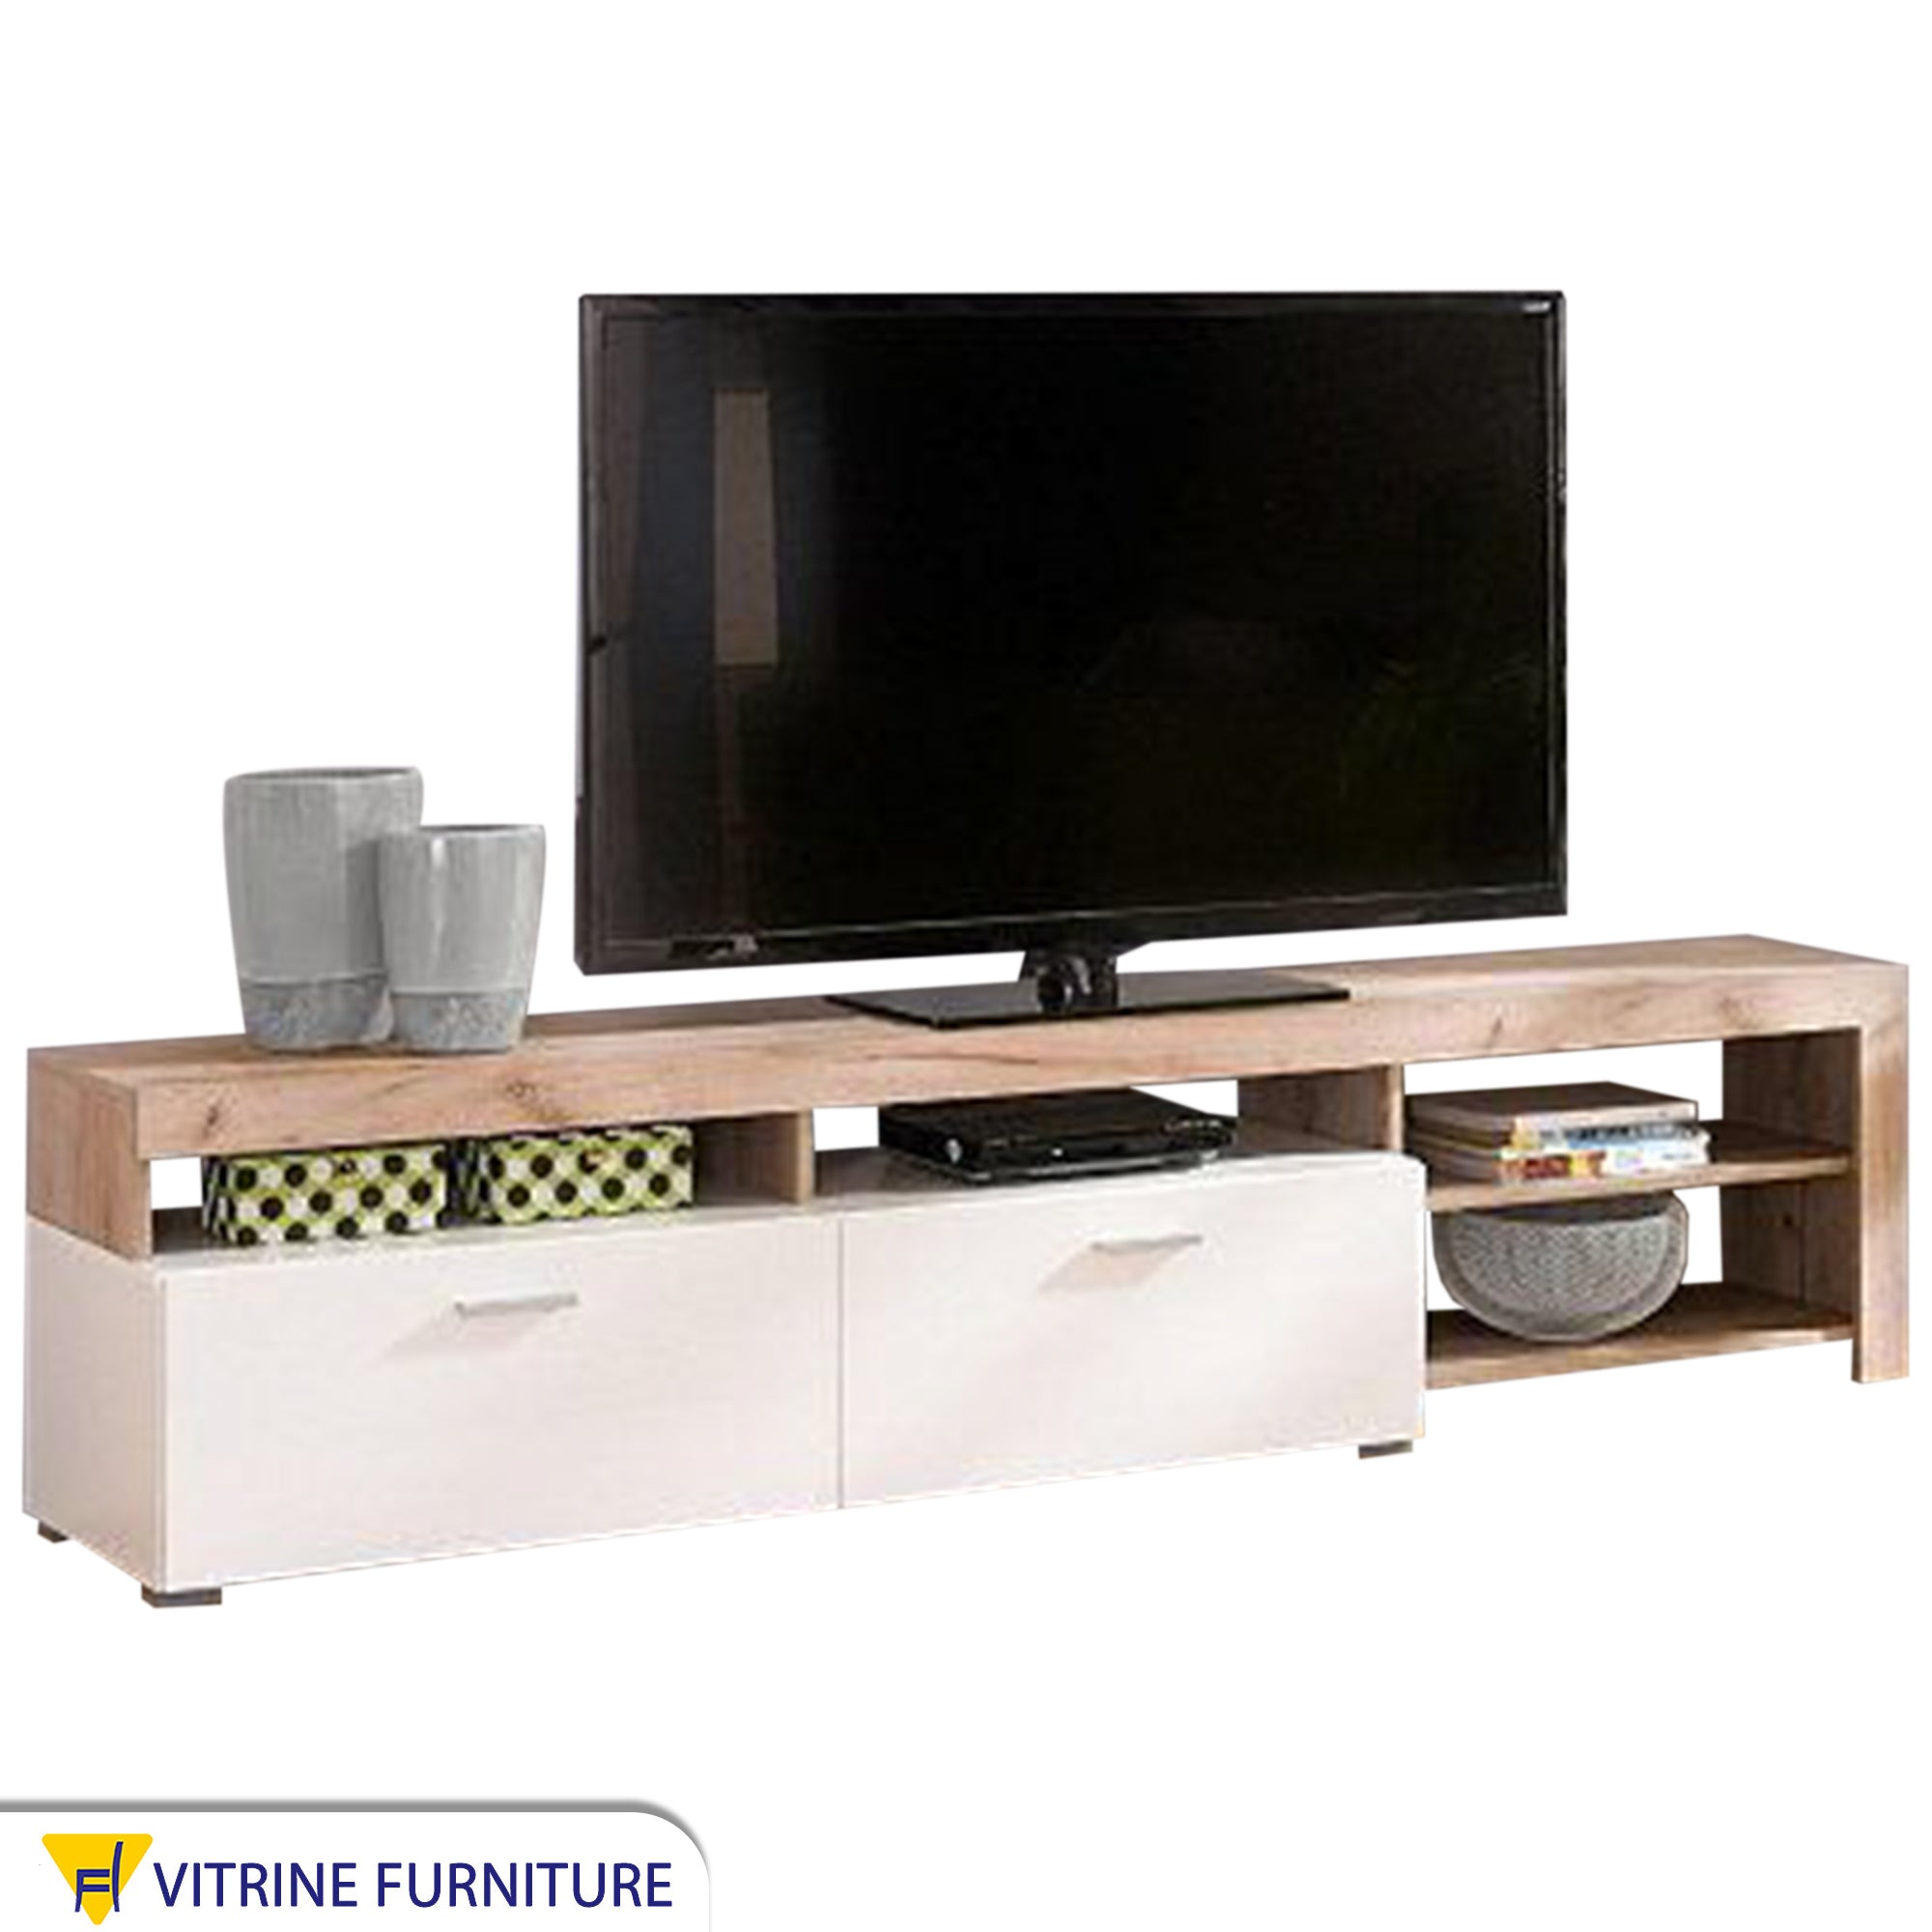 White and beige TV table